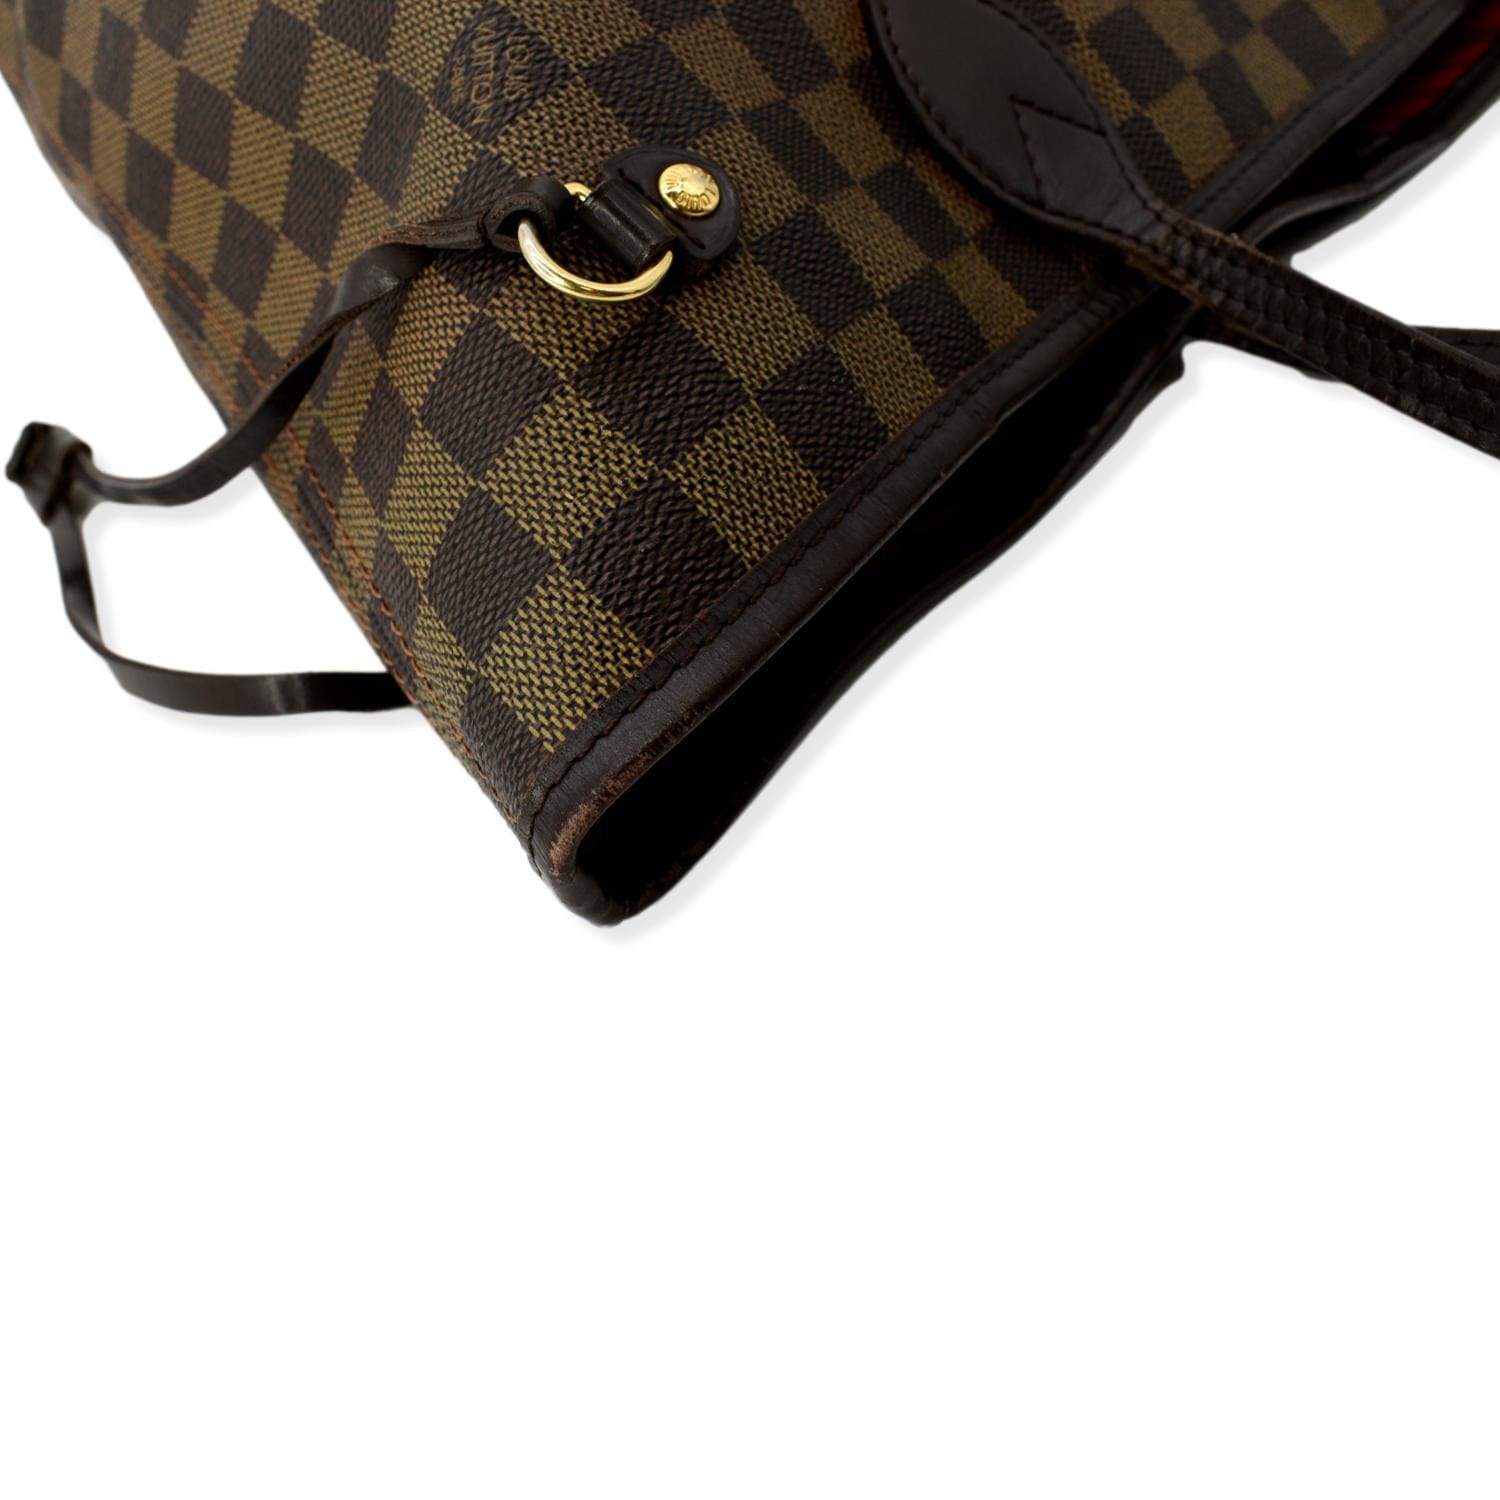 Louis Vuitton 2009 pre-owned Neverfull MM Damier Ebene Tote Bag